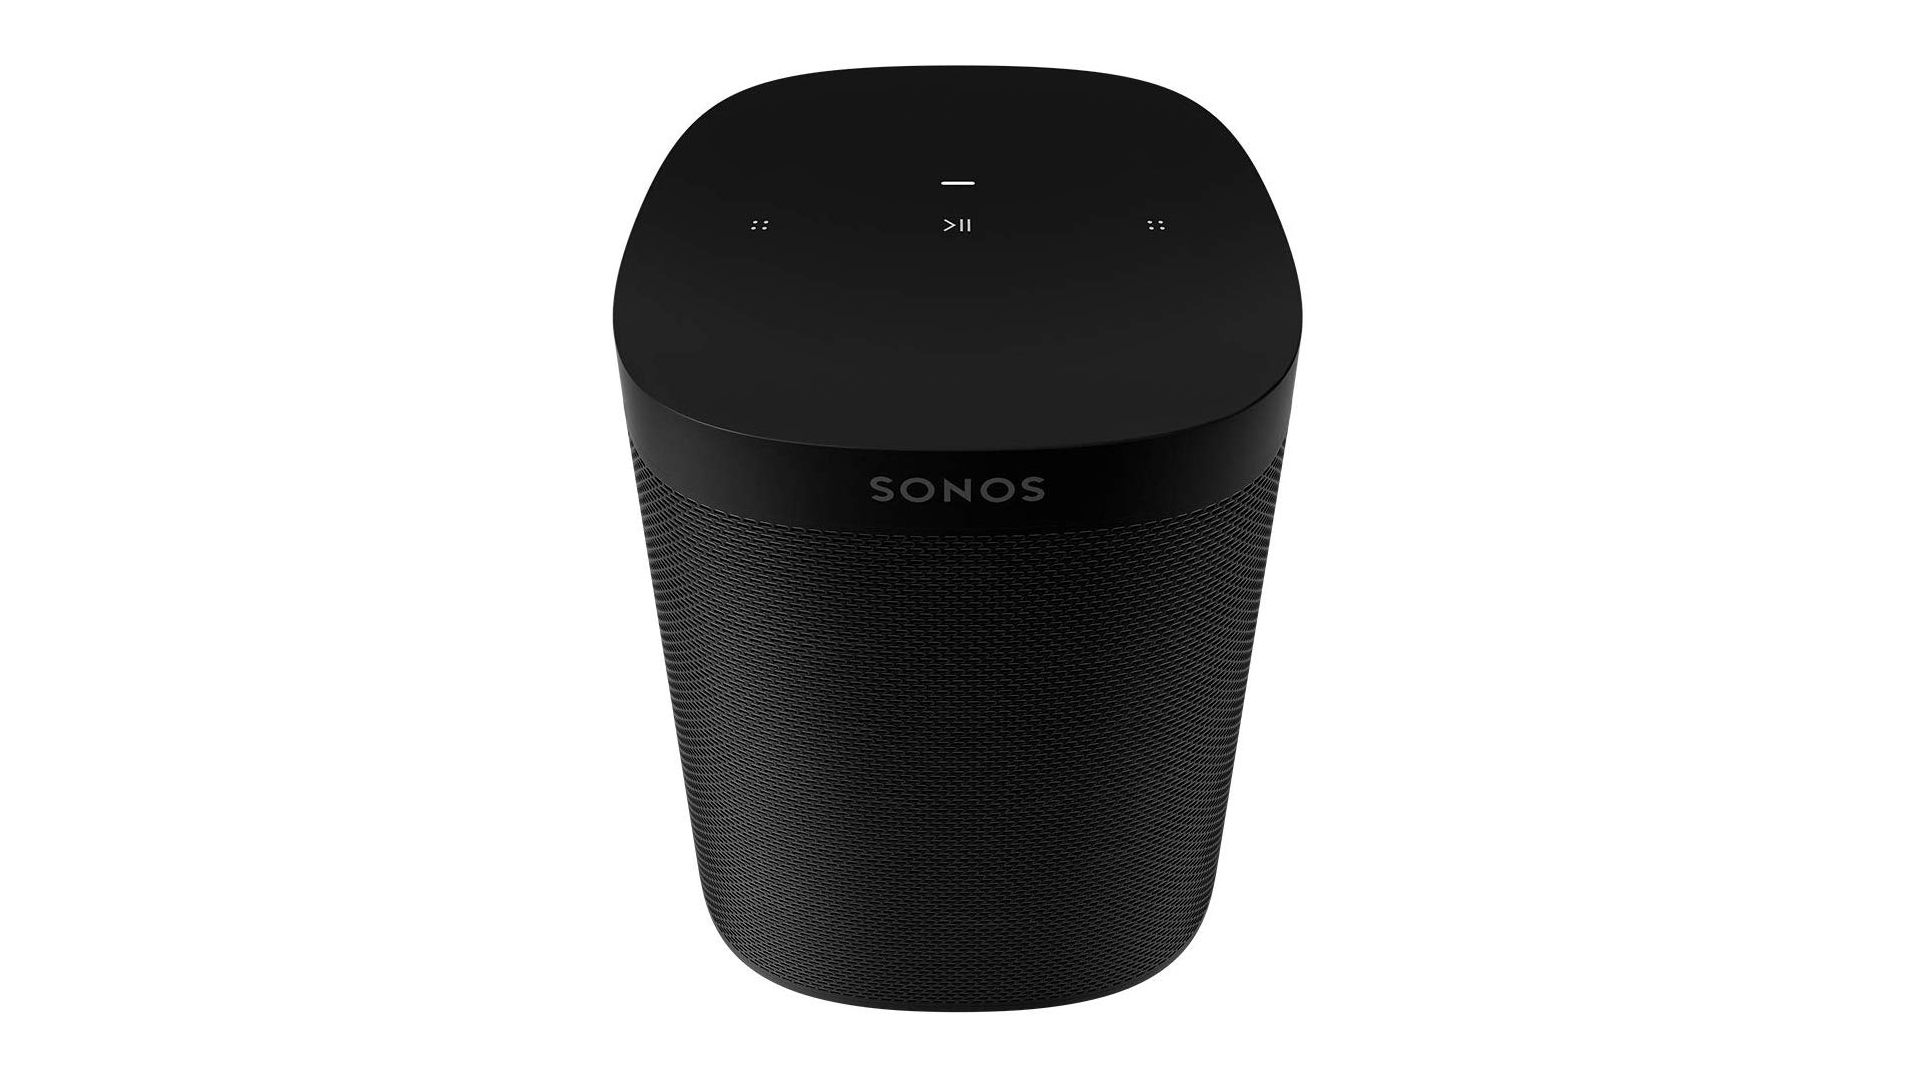 A product shot of the Sonos One SL shown at an angle from the top down against a white background.